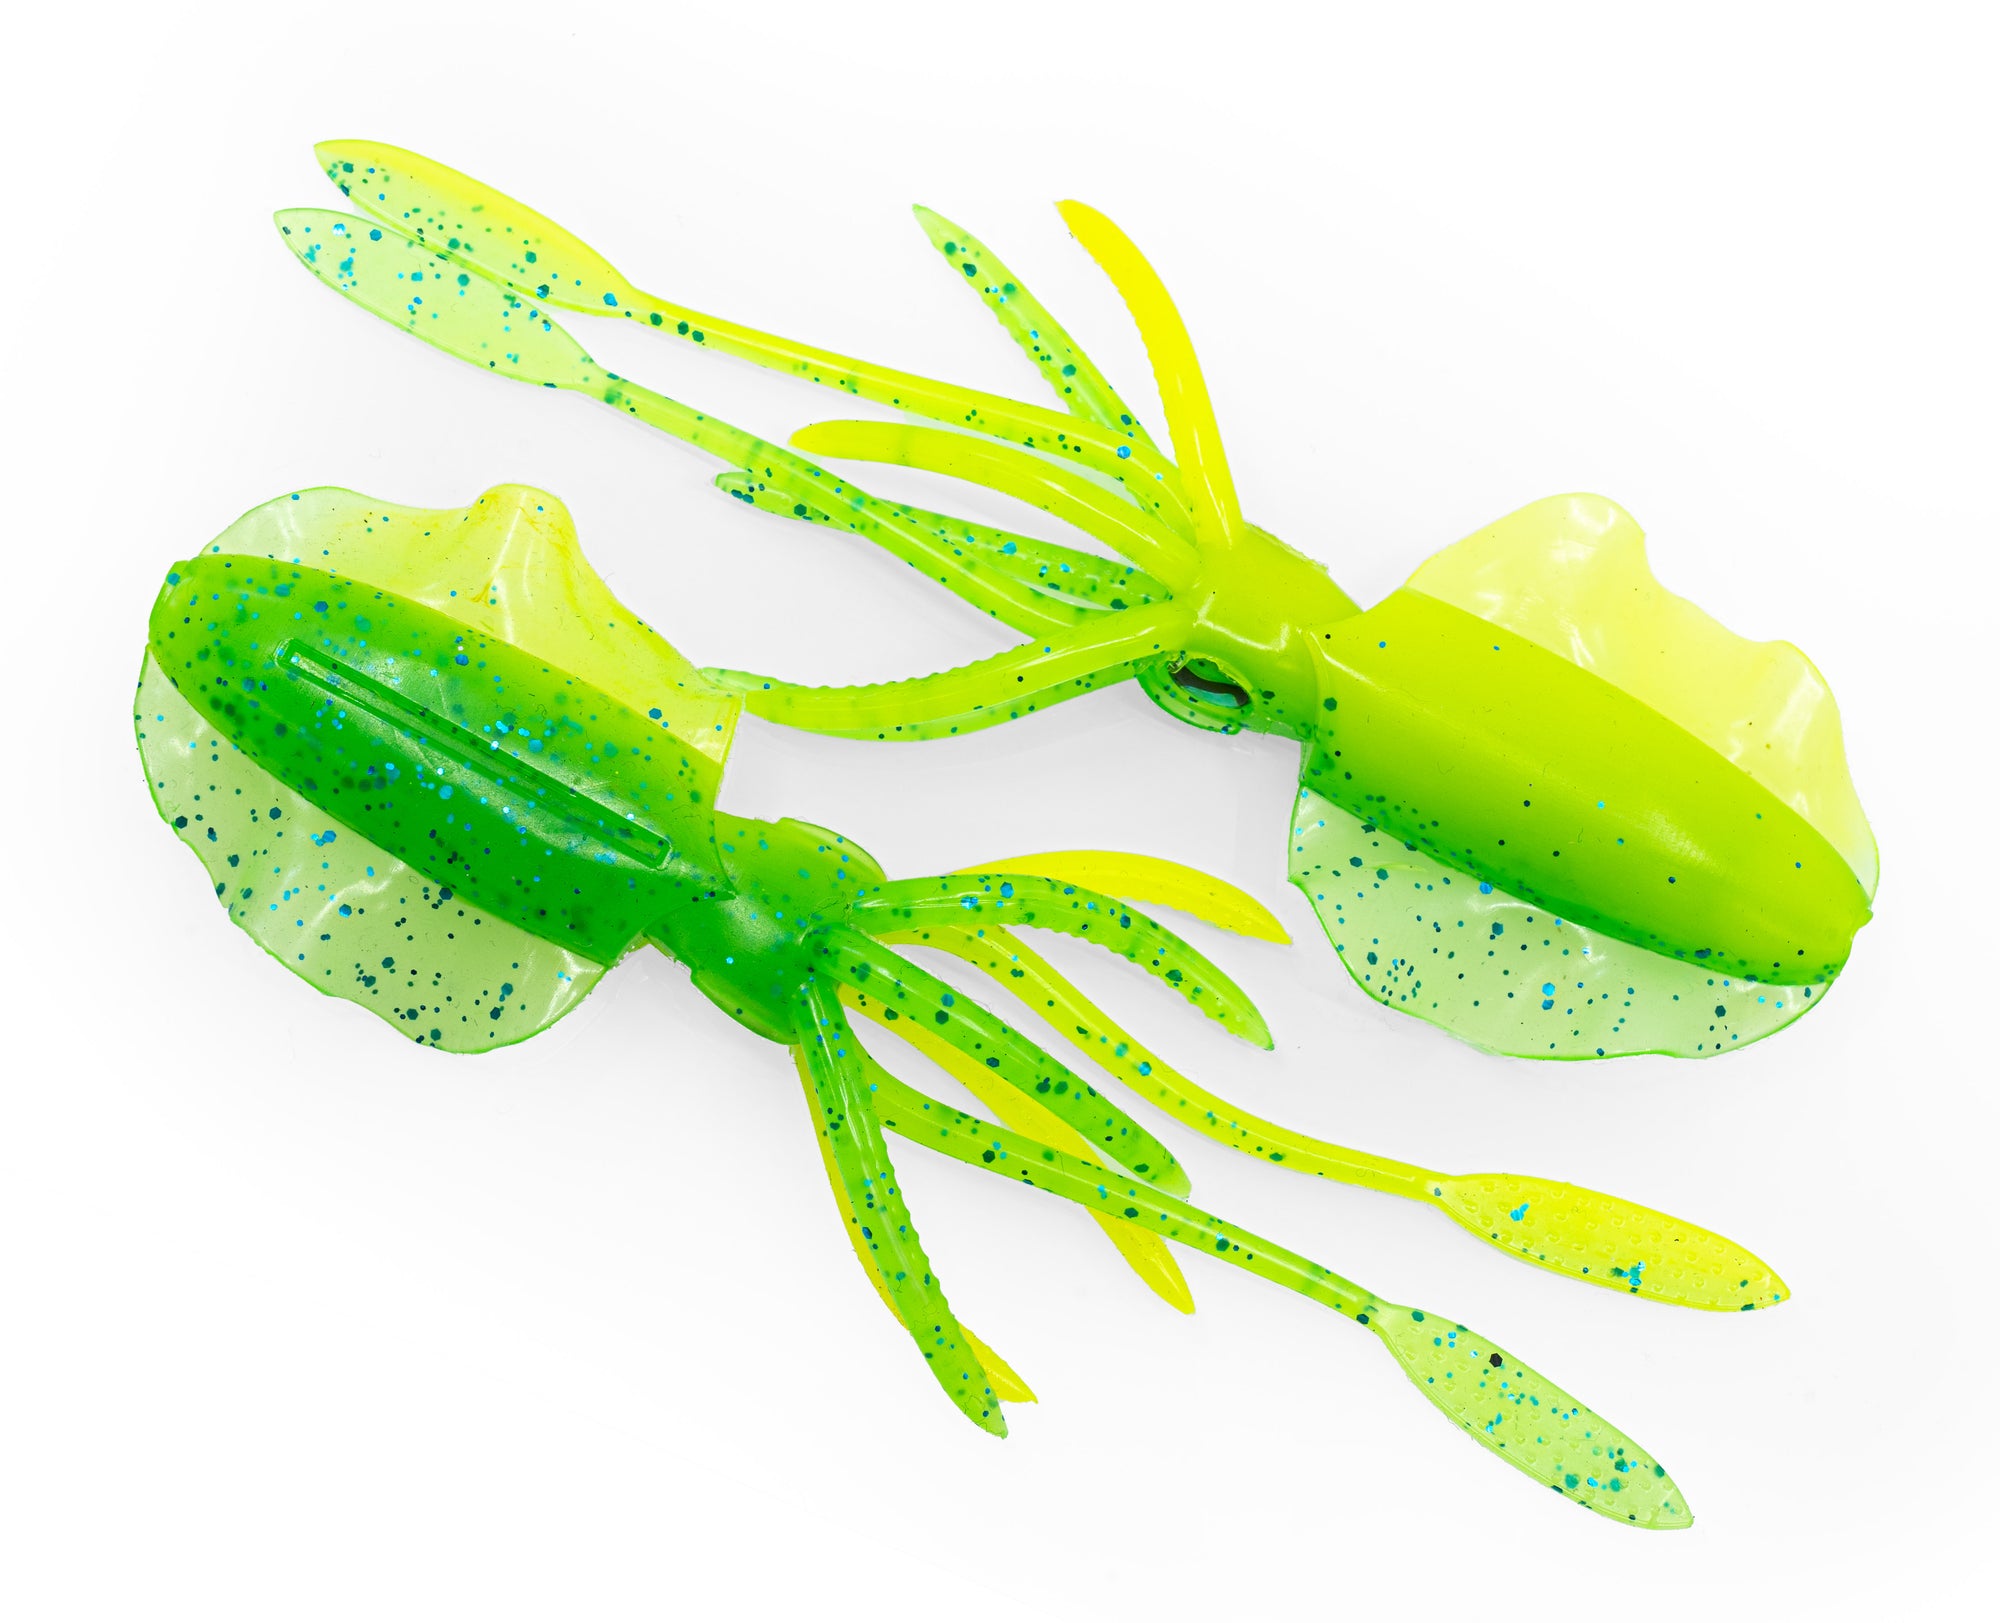 Chasebaits The Ultimate Squid 150/200/300 Soft Lure — Discount Tackle